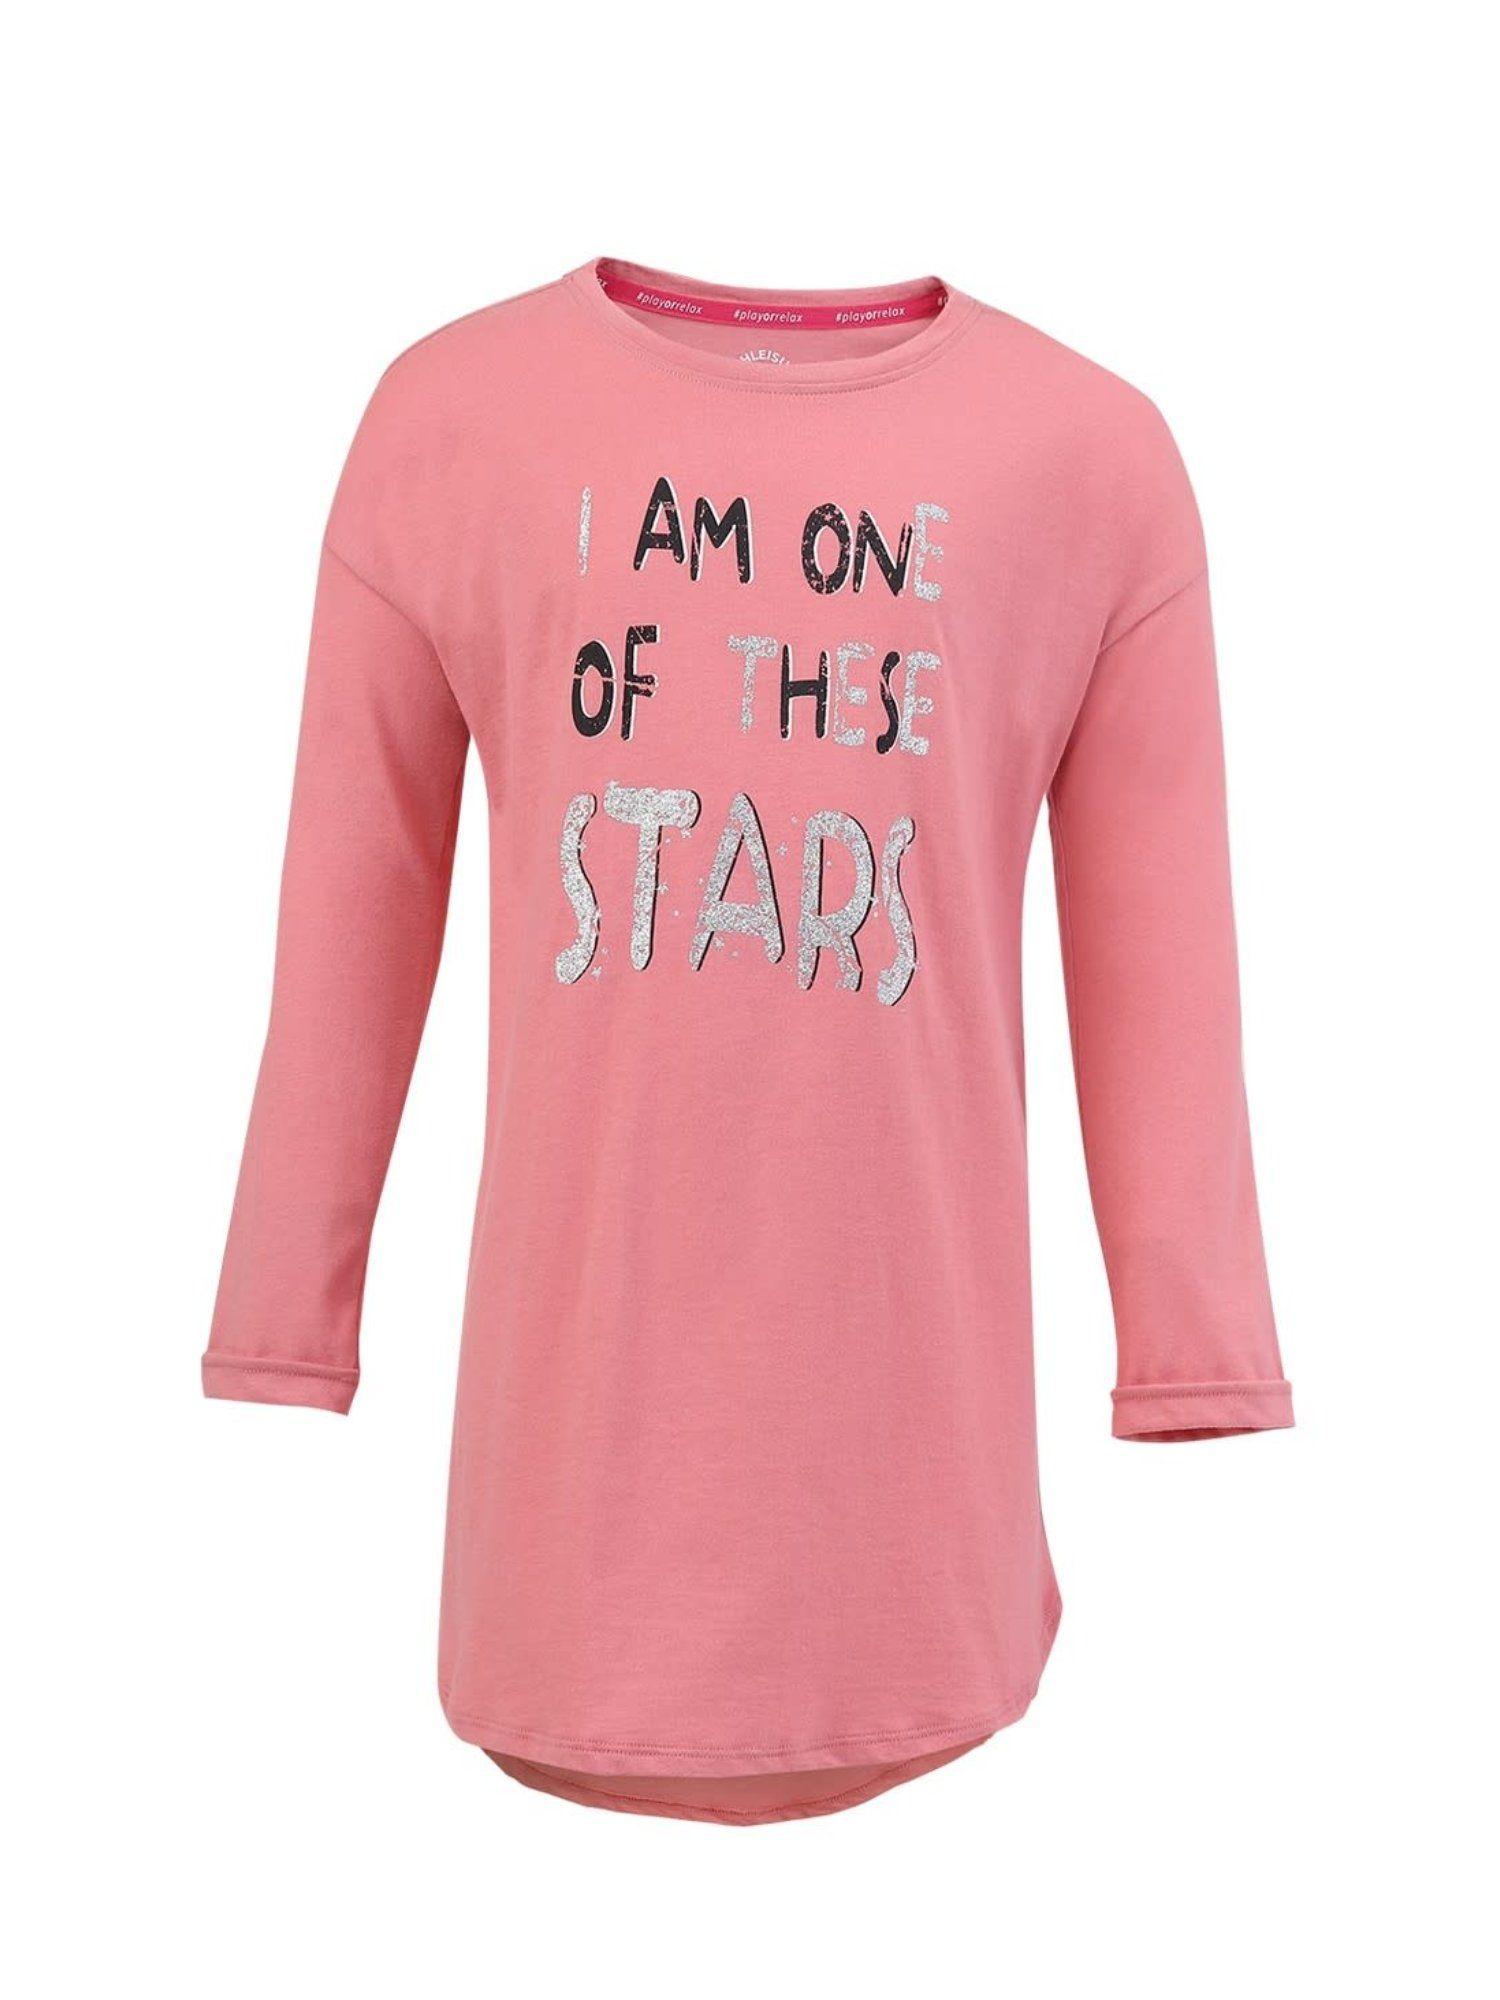 ag64 cotton round neck full sleeves t-shirt for girls pink